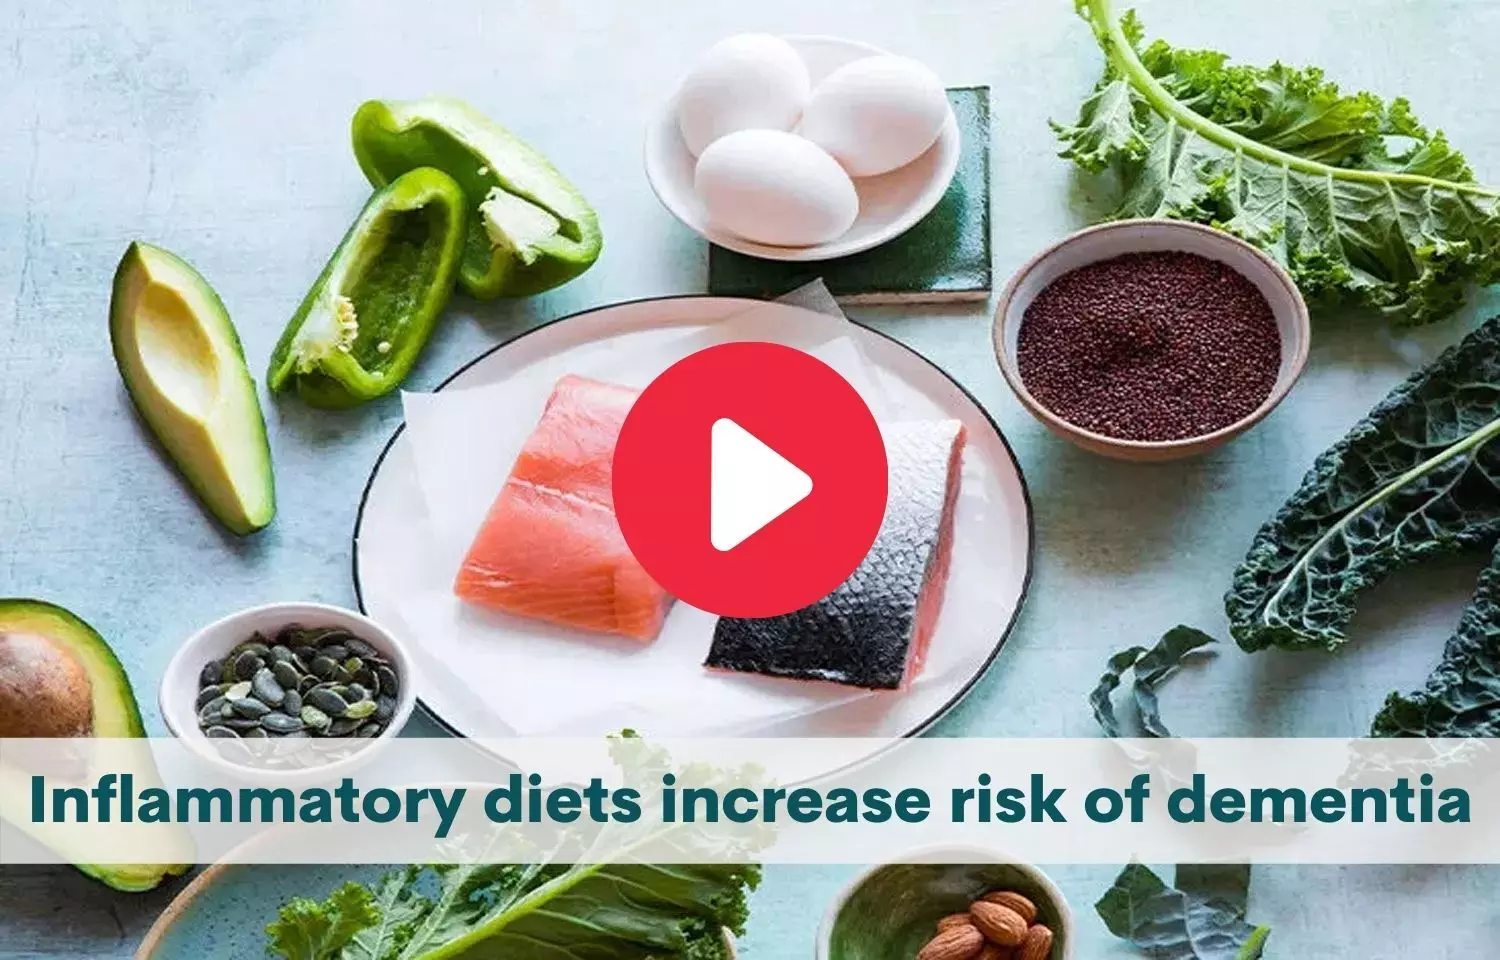 Dementia risk increases with inflammatory diet consumption